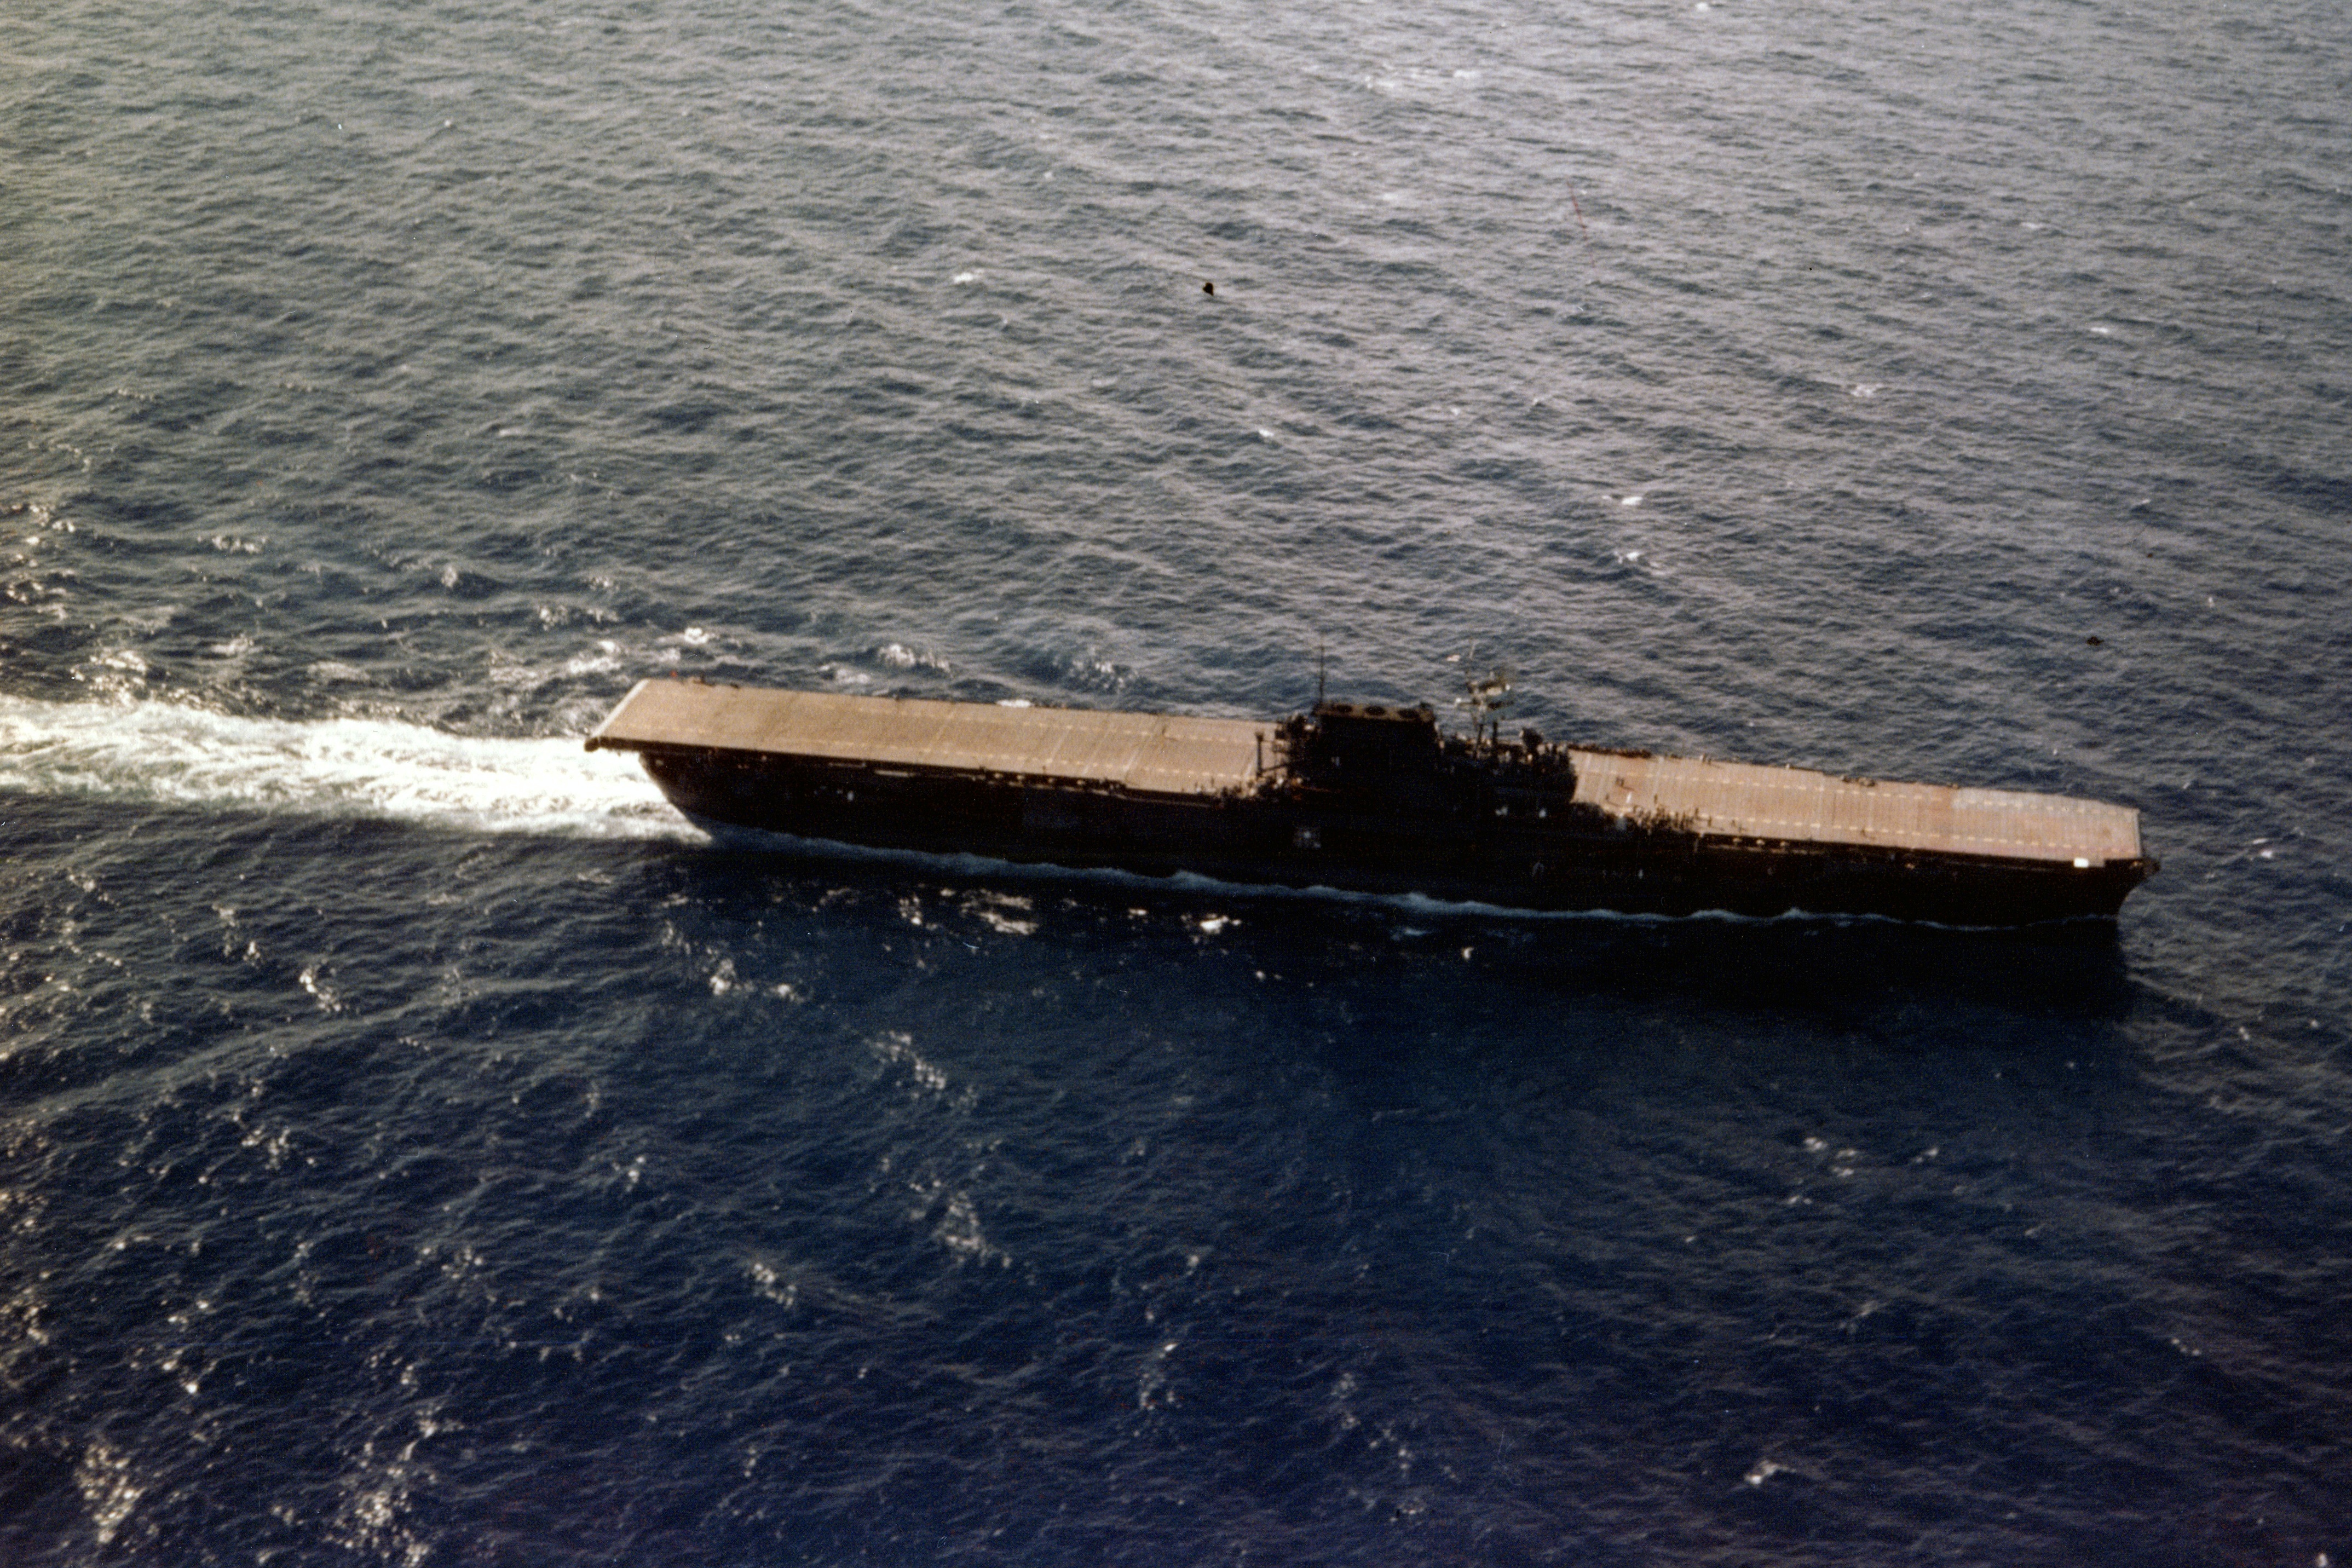 USS Enterprise in the Pacific turning into the wind to recover aircraft, late June 1941 before her natural wood flight deck was stained blue in July 1941.